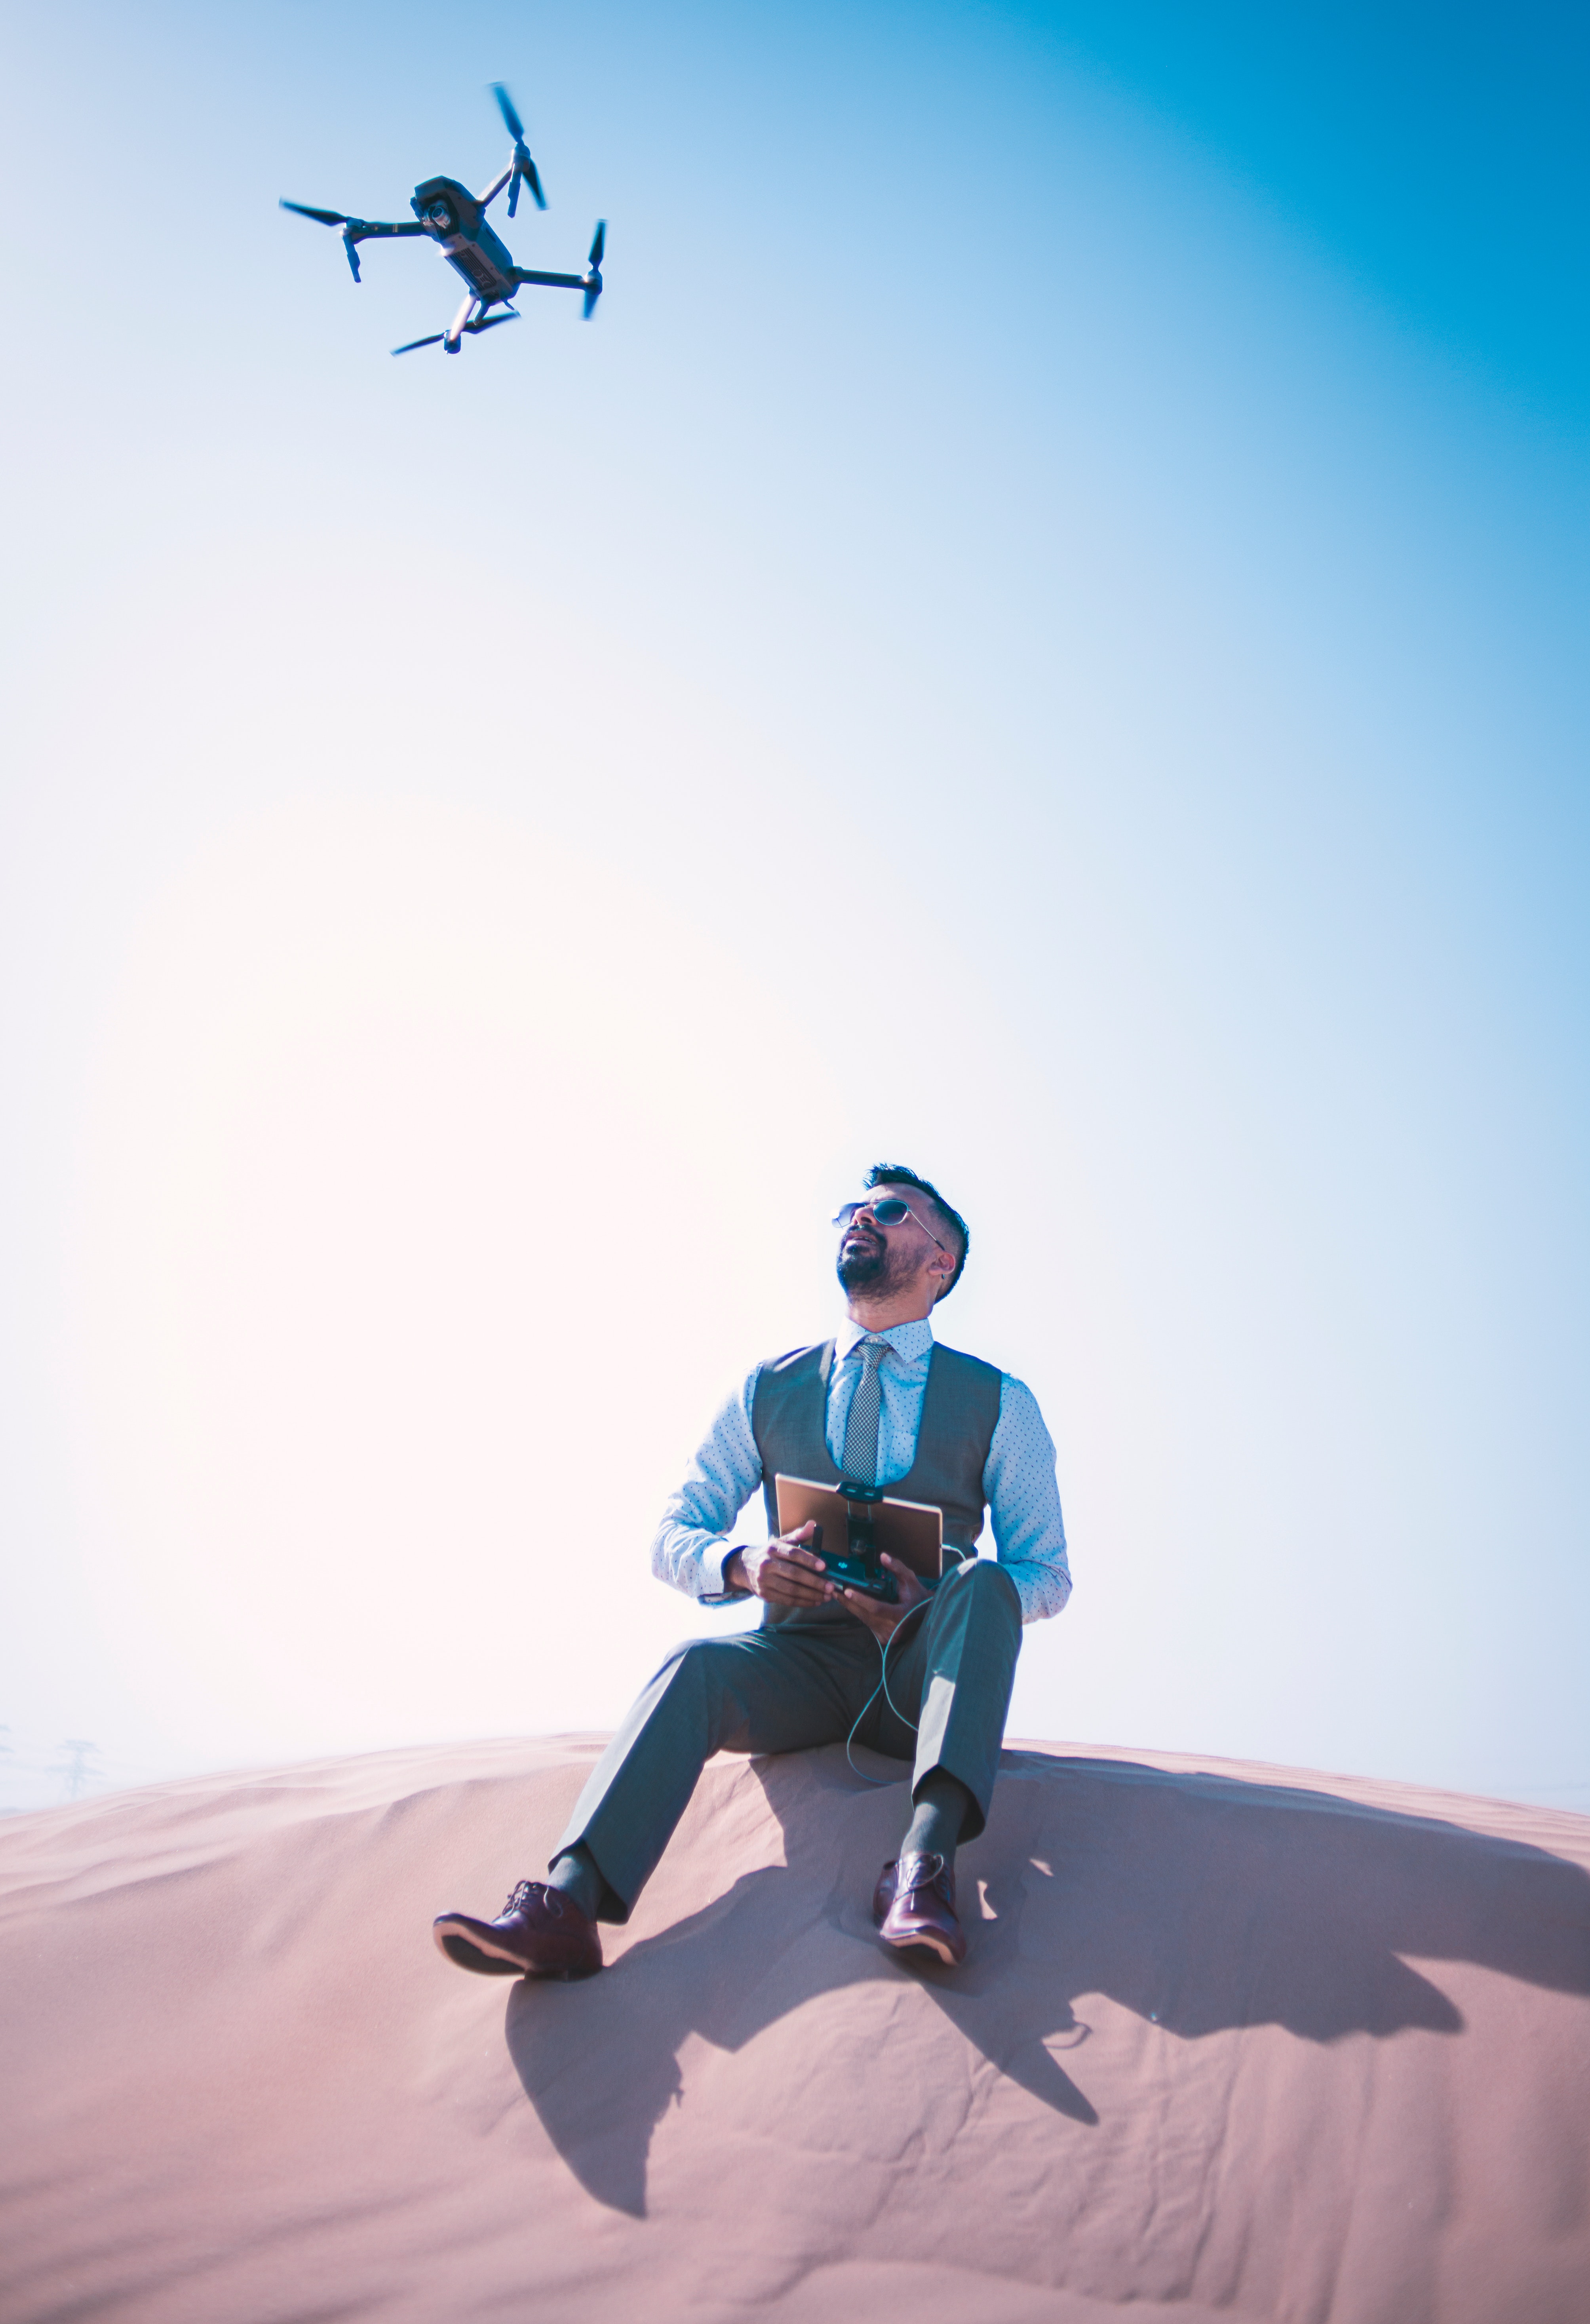 A man sitting on a desert ground looking up and operating a quadcopter